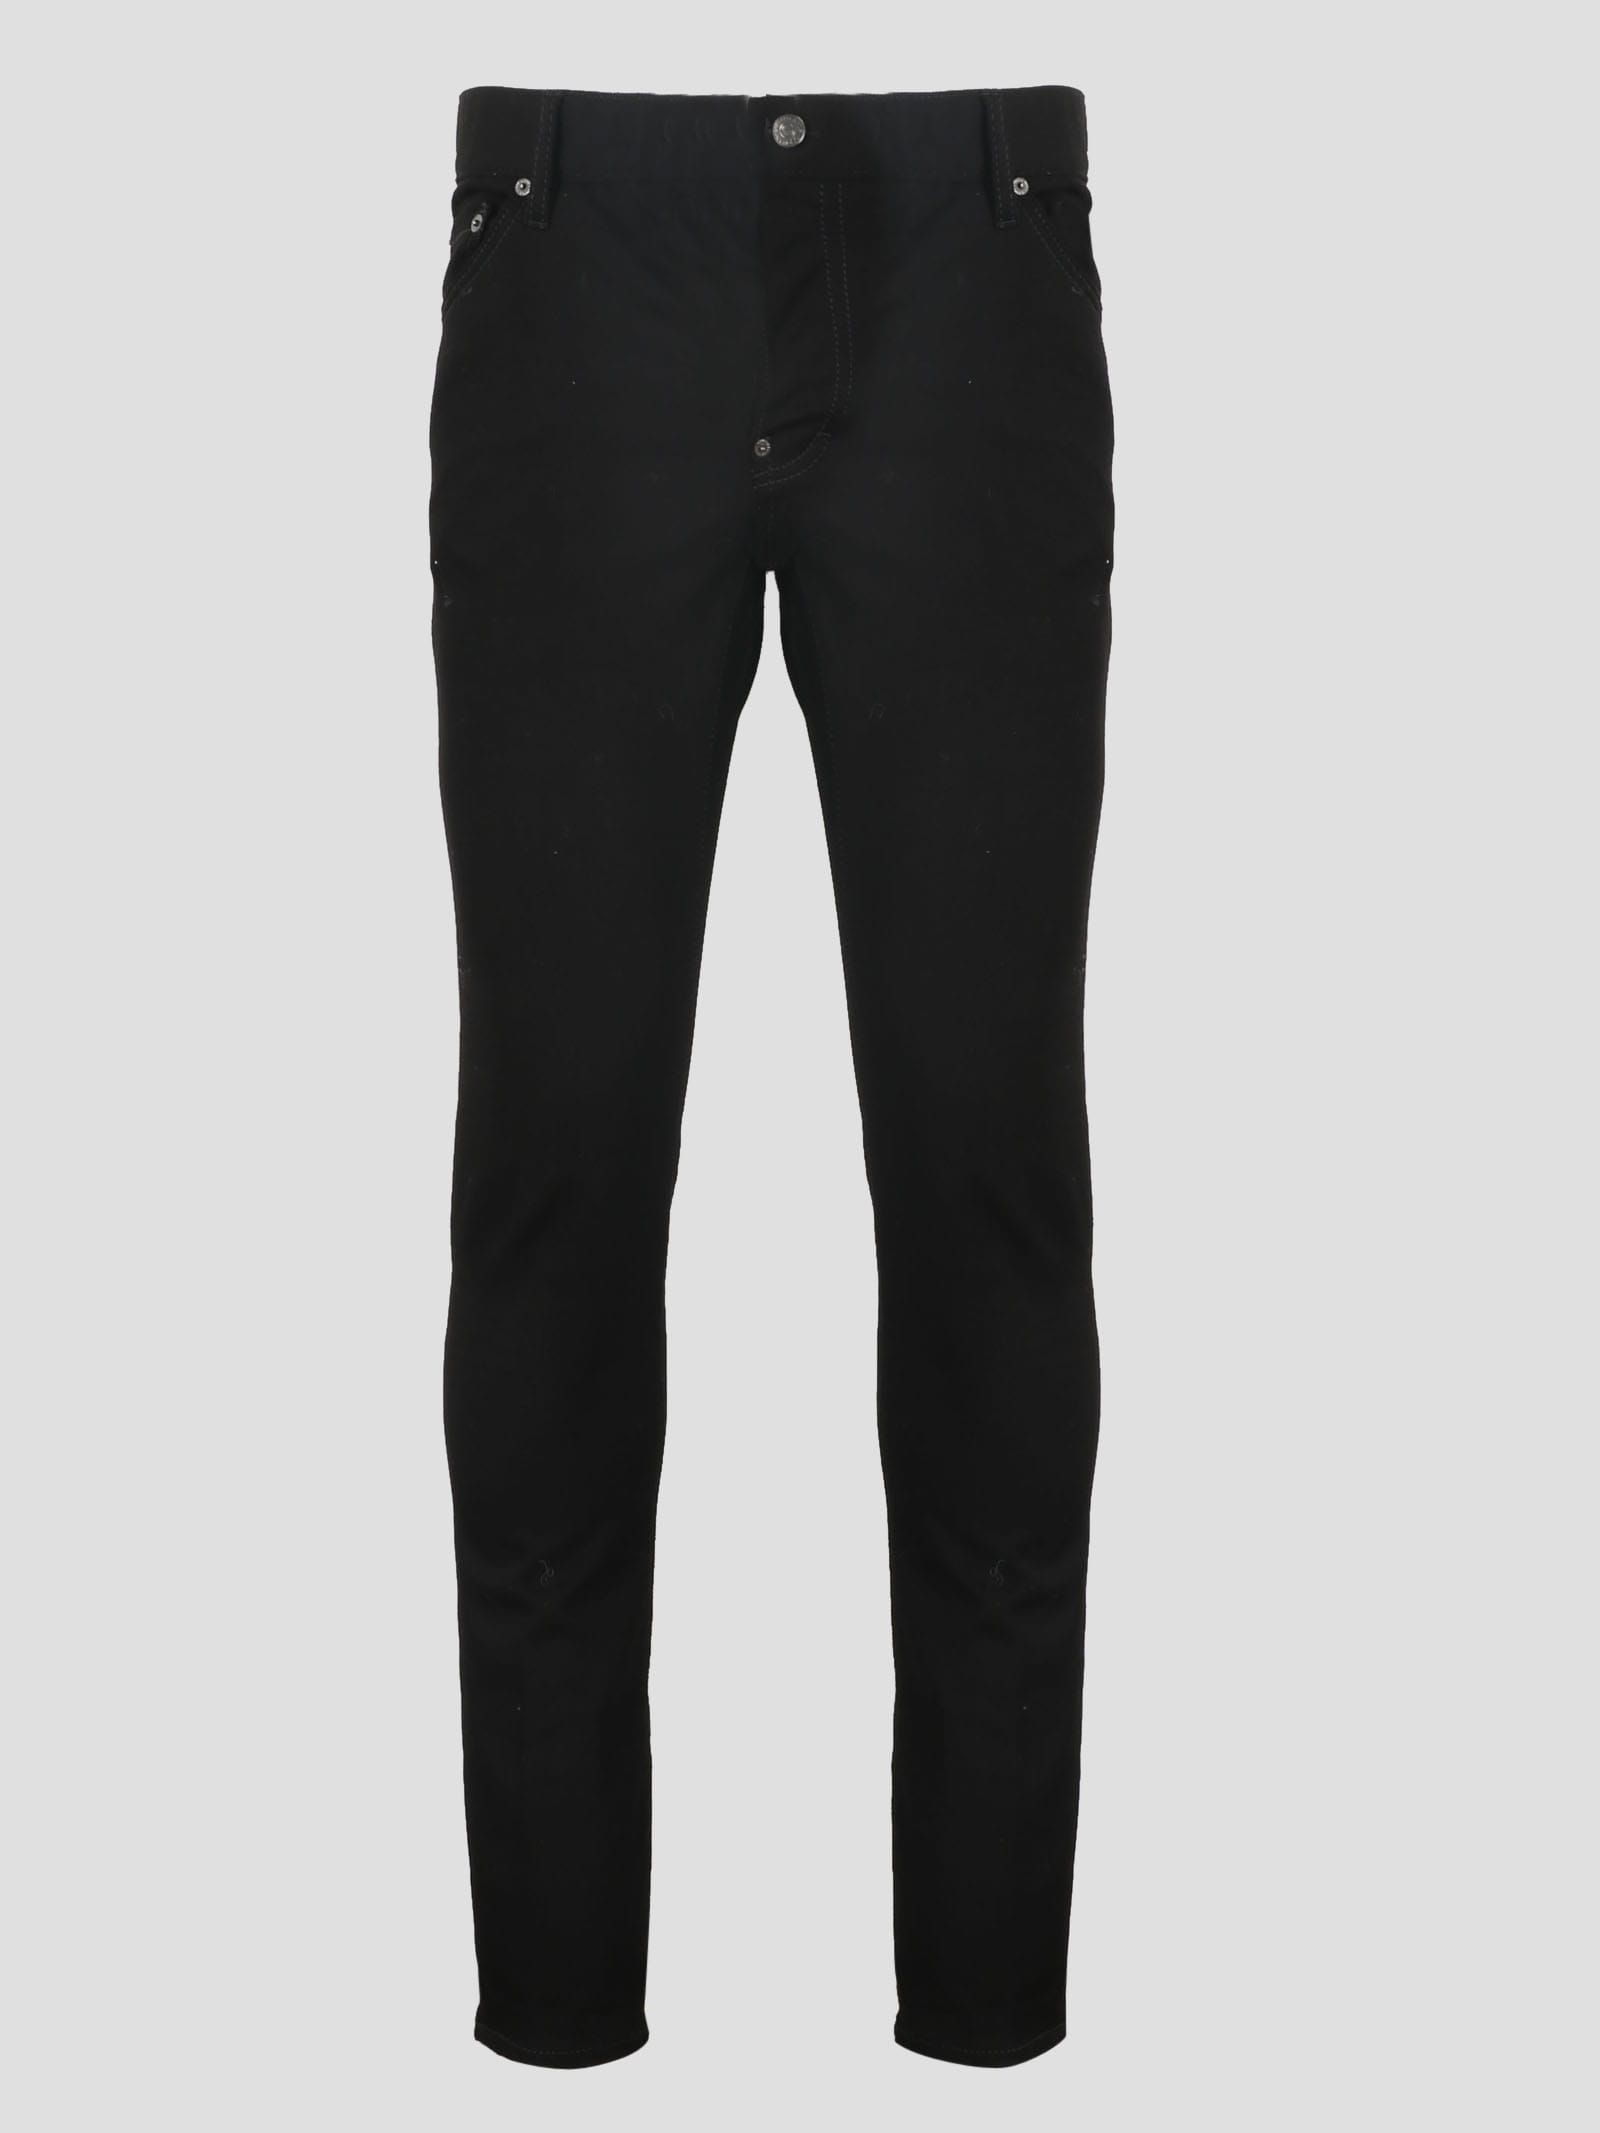 Dsquared2 Cool Guy Black Jeans